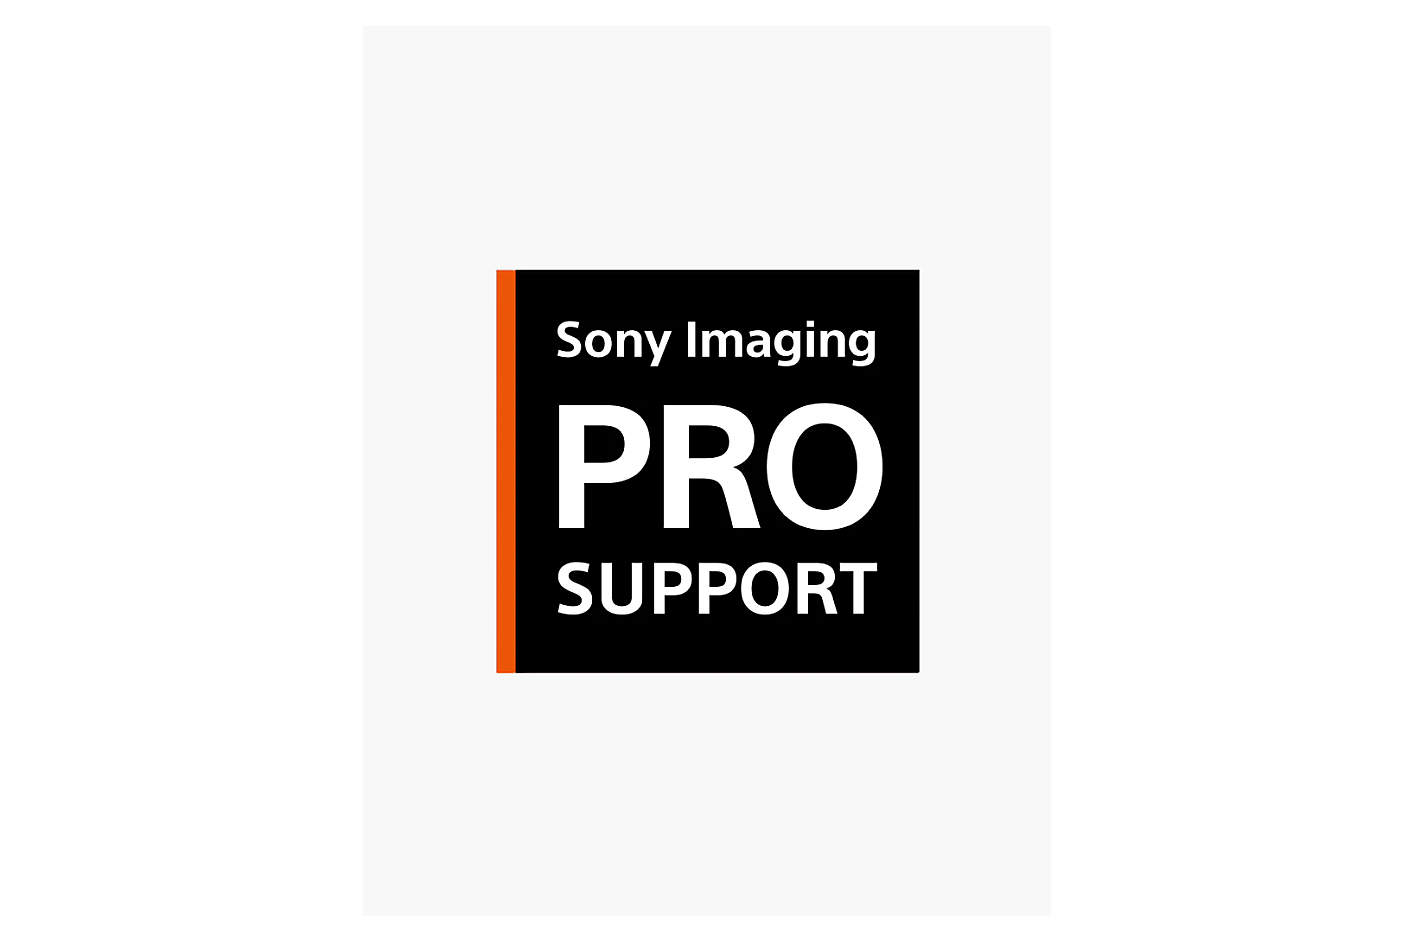 Sony Imaging Pro Support 標誌